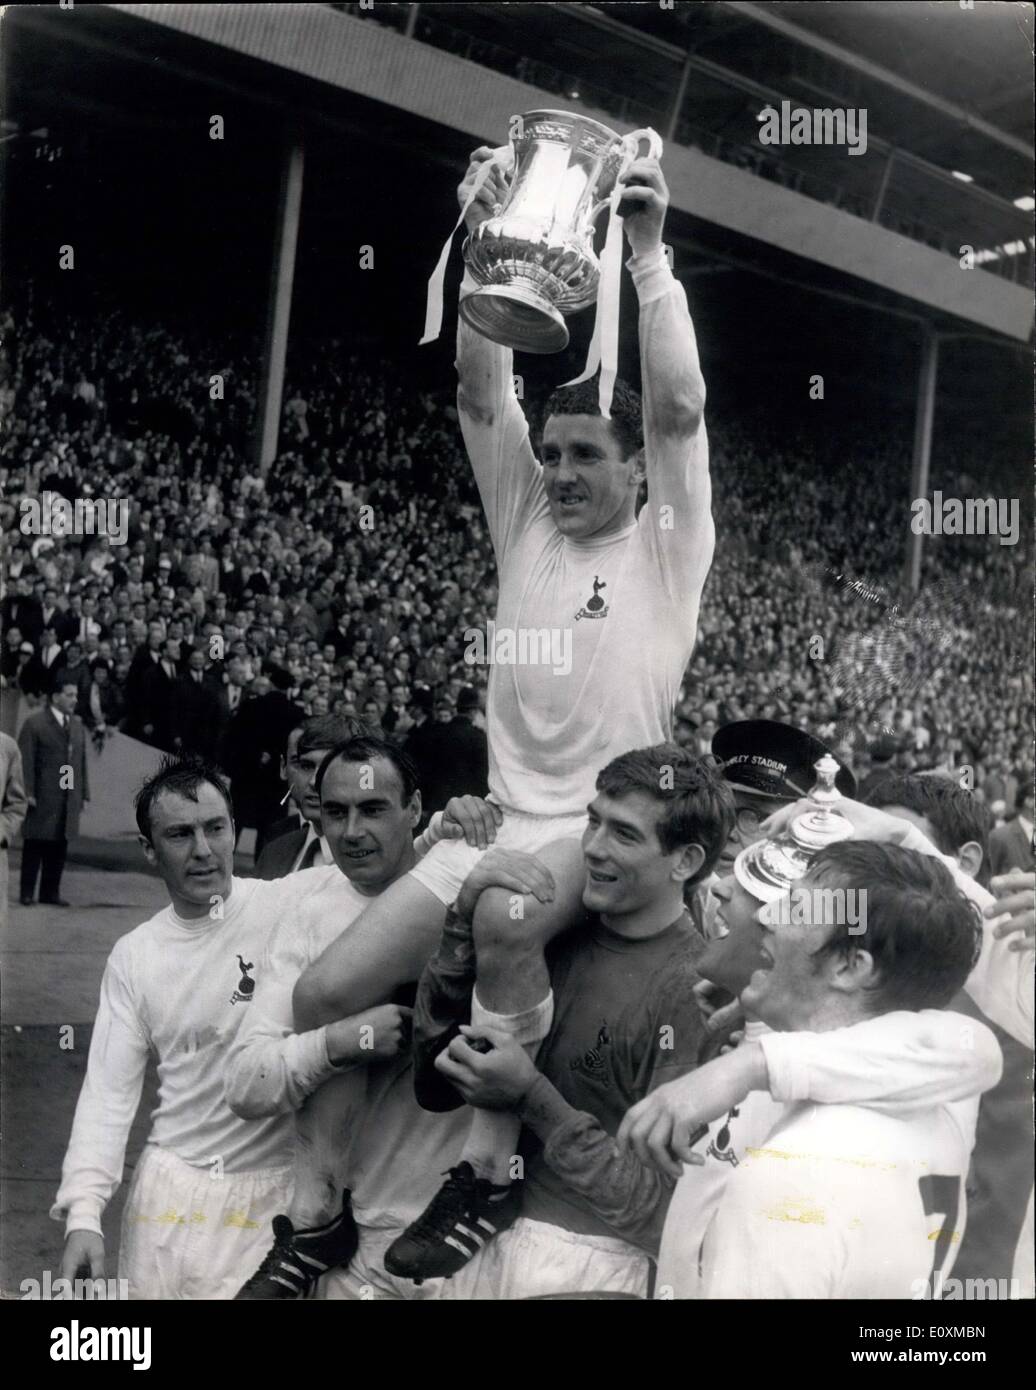 May 20, 1967 - F.A. CUP FINAL AT WEMBLEY. TOTTENHAM BEAT CHELSEA 2-1 TO WIN  THE CUP. PHOTO SHOWS: MACKAY, the Spurs captain, helds the F.A. Cup aleft  as he is chaired